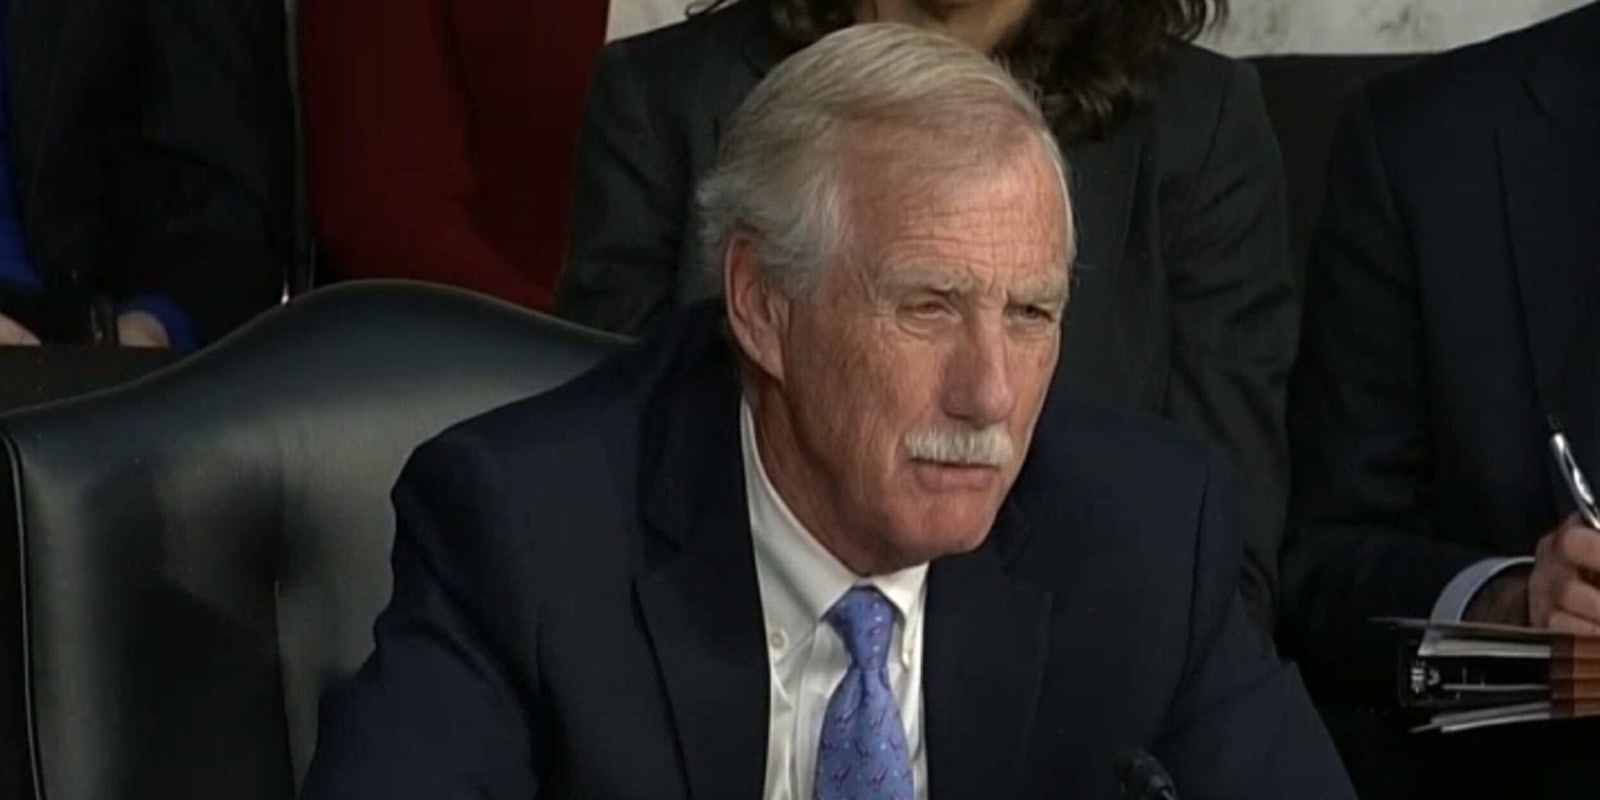 Sen. Angus King (I-Maine) told Twitter, Google and Facebook on Wednesday afternoon that he believes Russia got a 'free pass' for the interference it caused on American social media giants' platform ahead of the 2016 election and other campaigns it has waged.